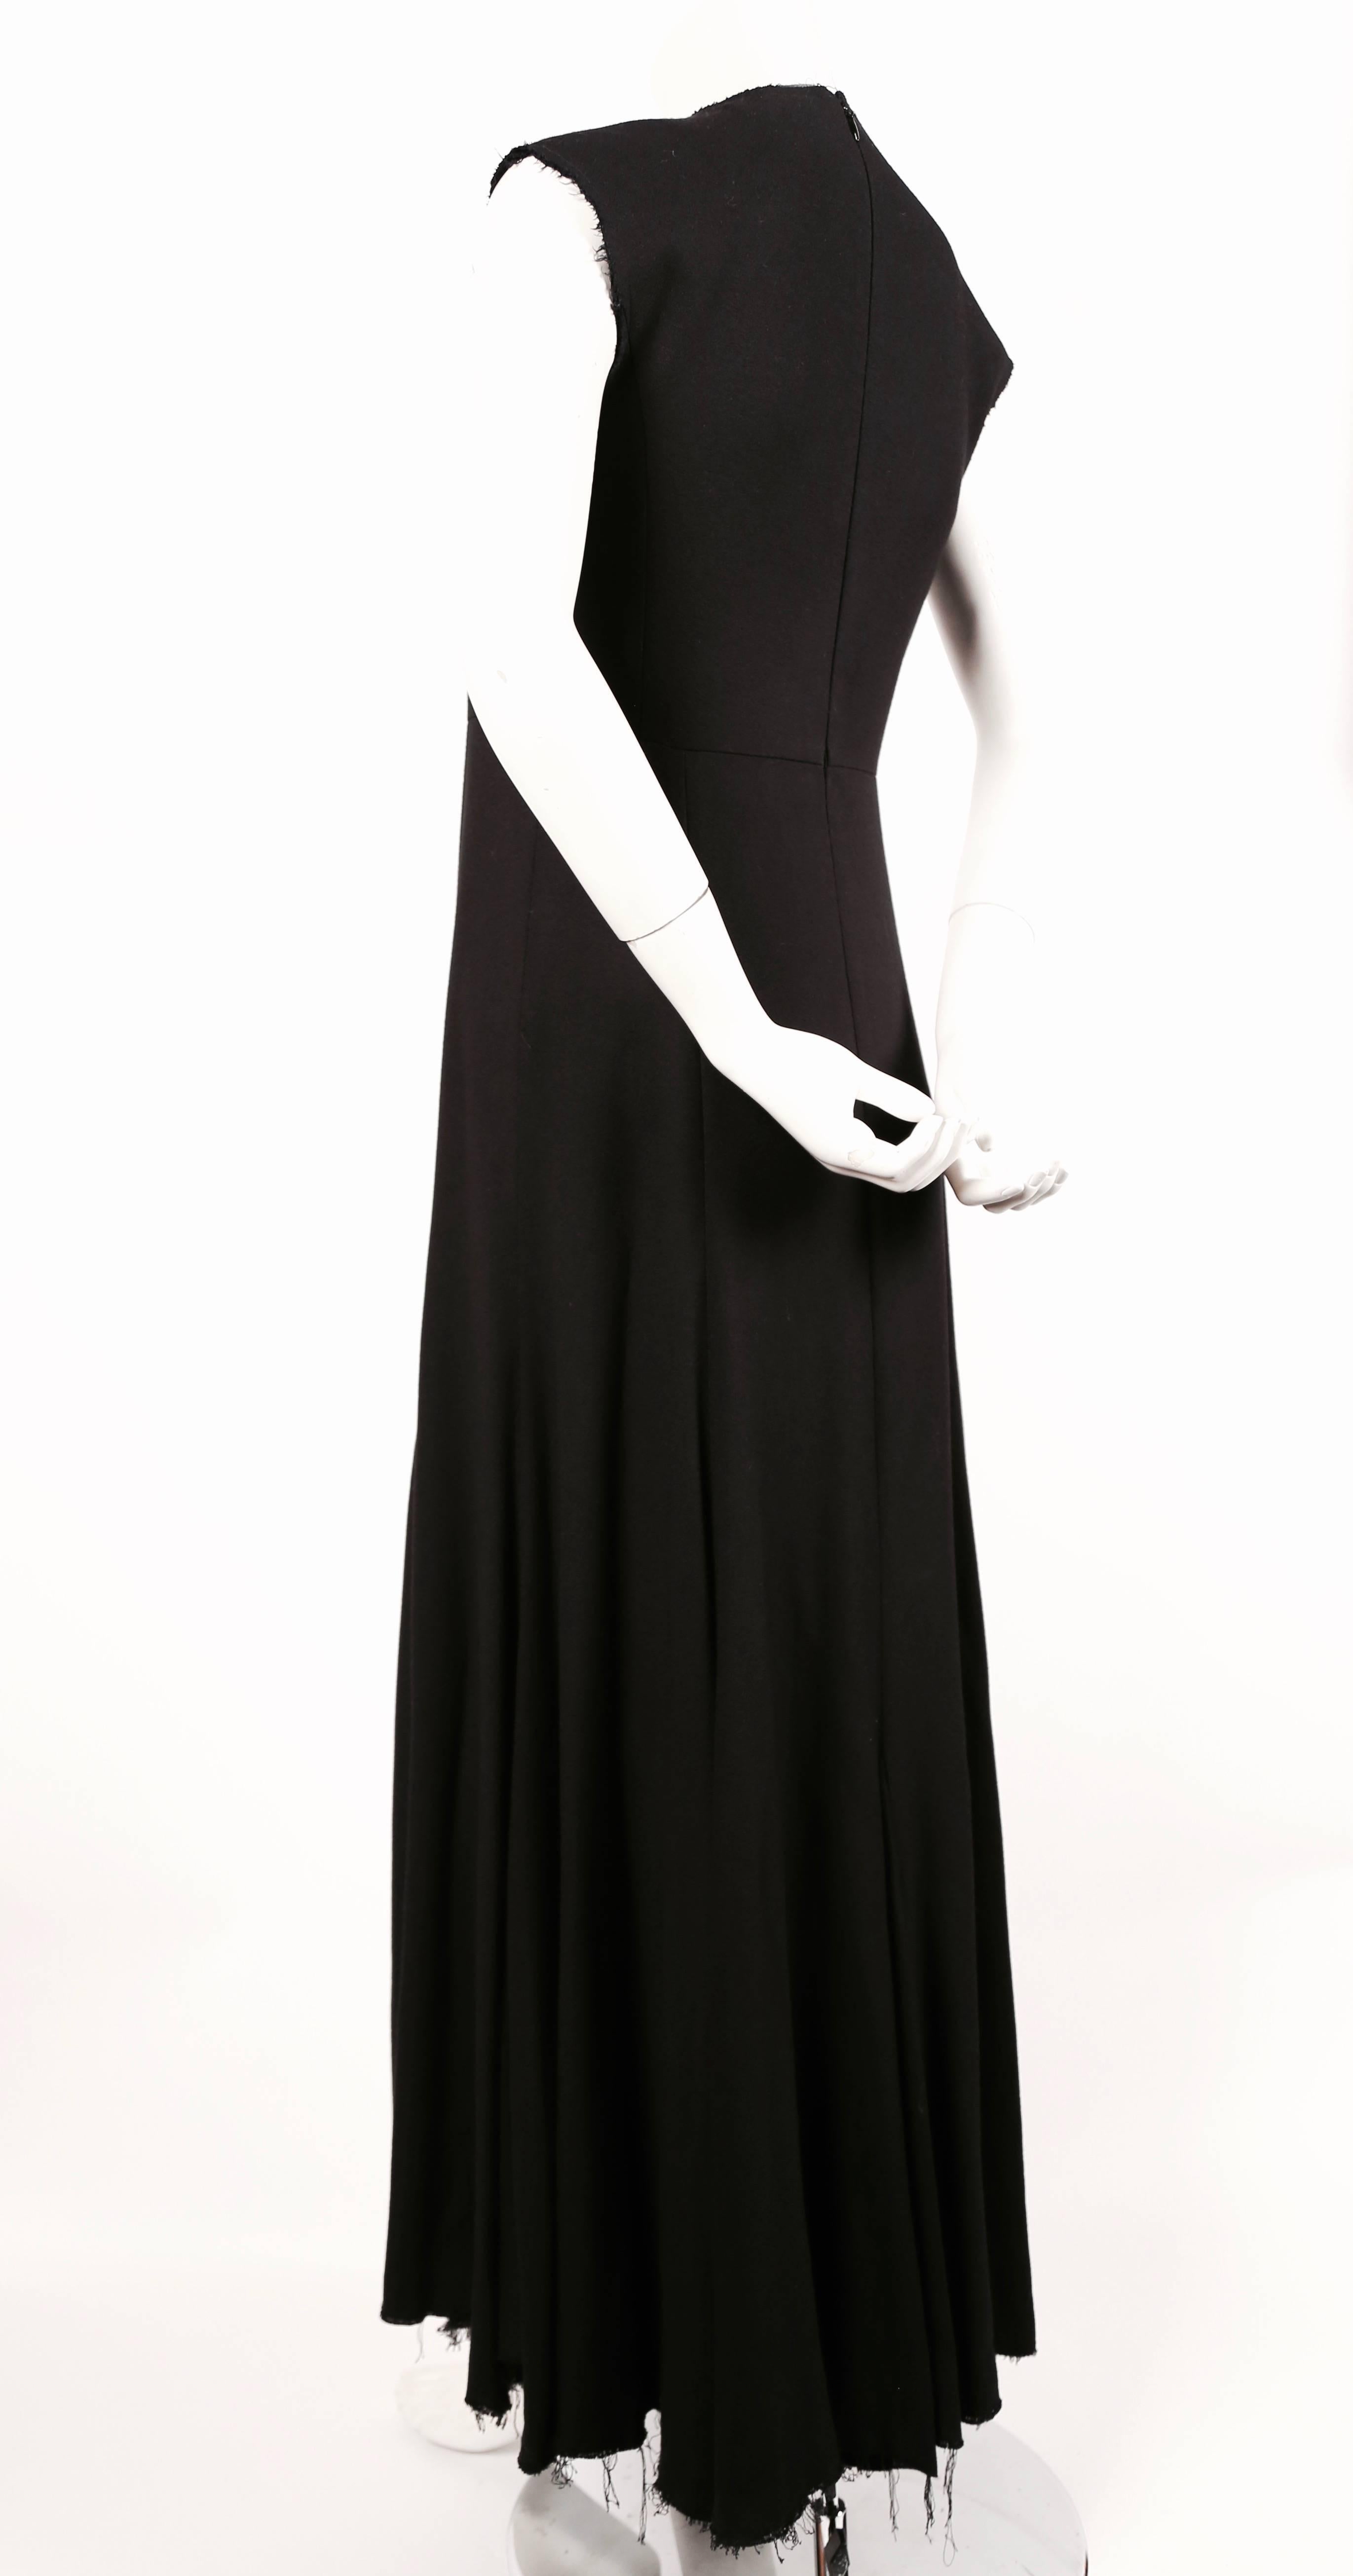 Very rare, black seamed maxi dress with raw edges and fringed hemline designed by Phoebe Philo for Celine exactly as seen on the 2013 spring runway. This is a very difficult to find dress. It is a French size 36 which best fits a size 2. Approximate